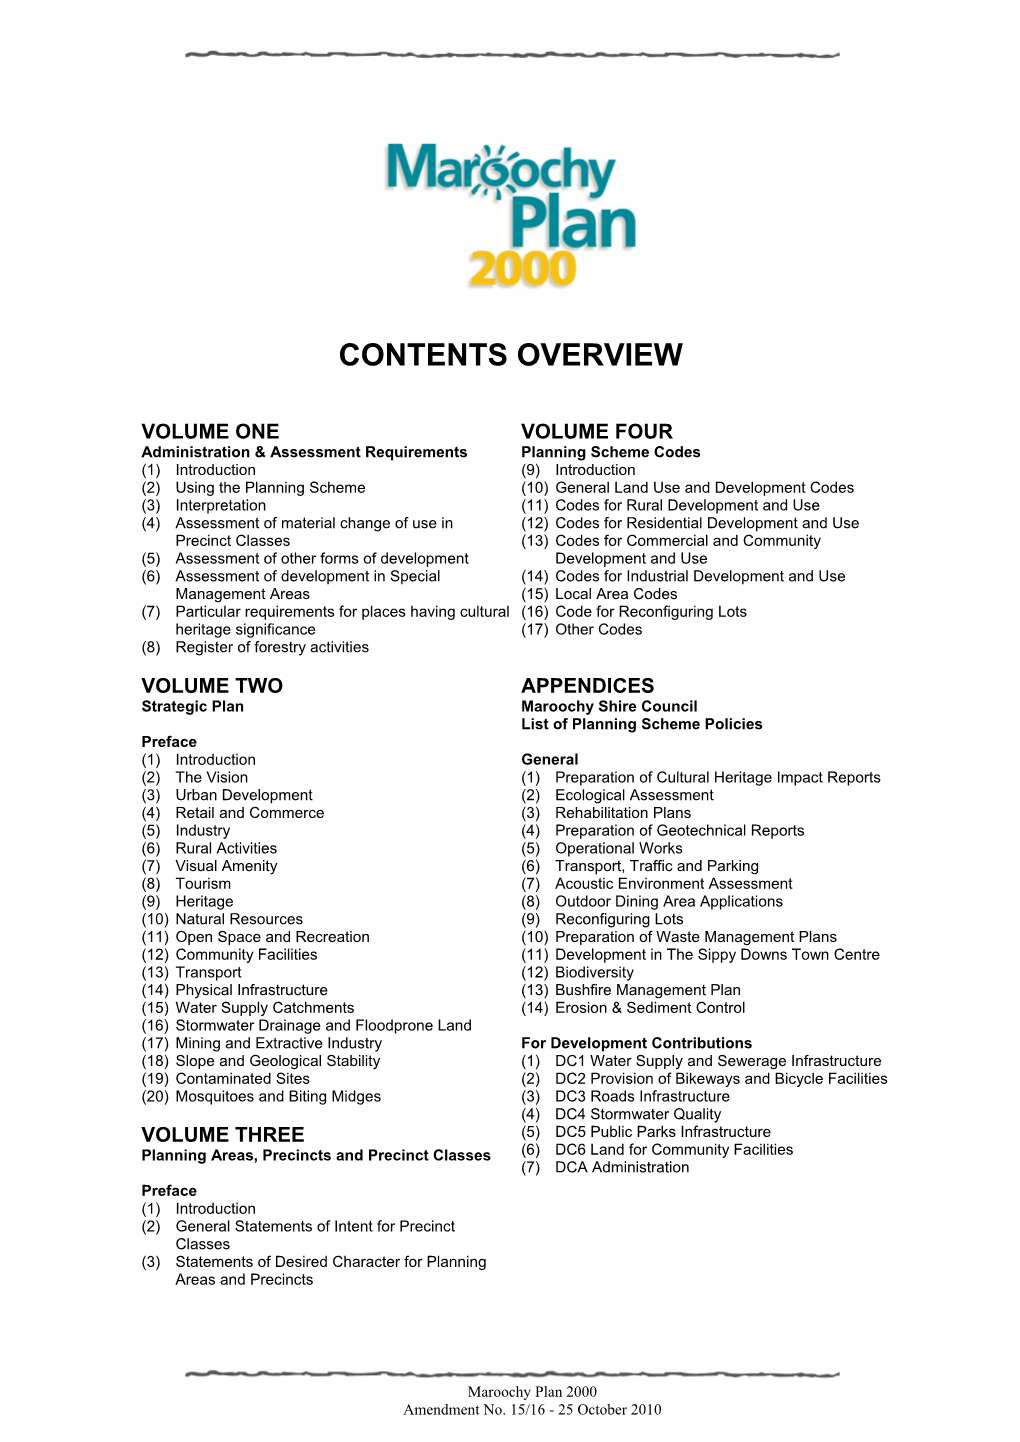 Contents Overview